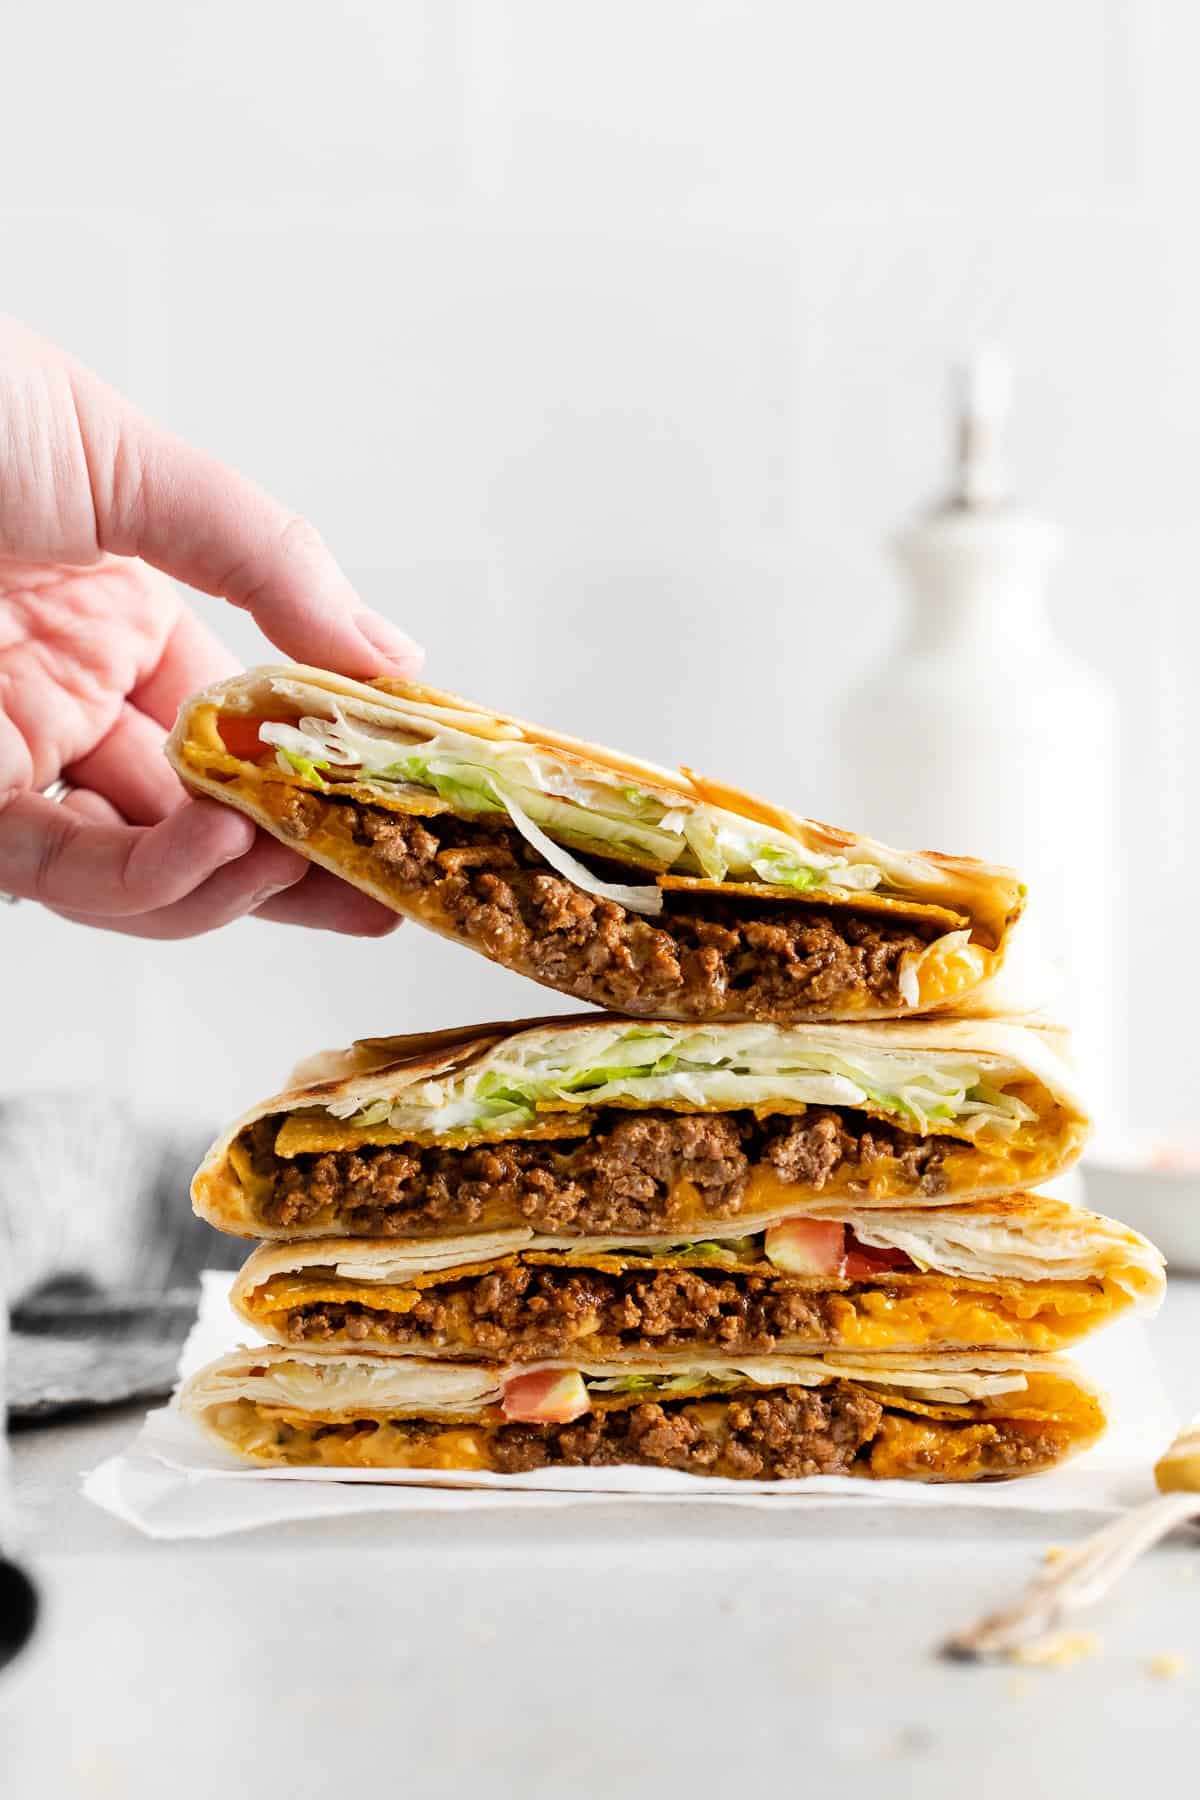 Crunchwrap supreme stacked 4 high on a plate.